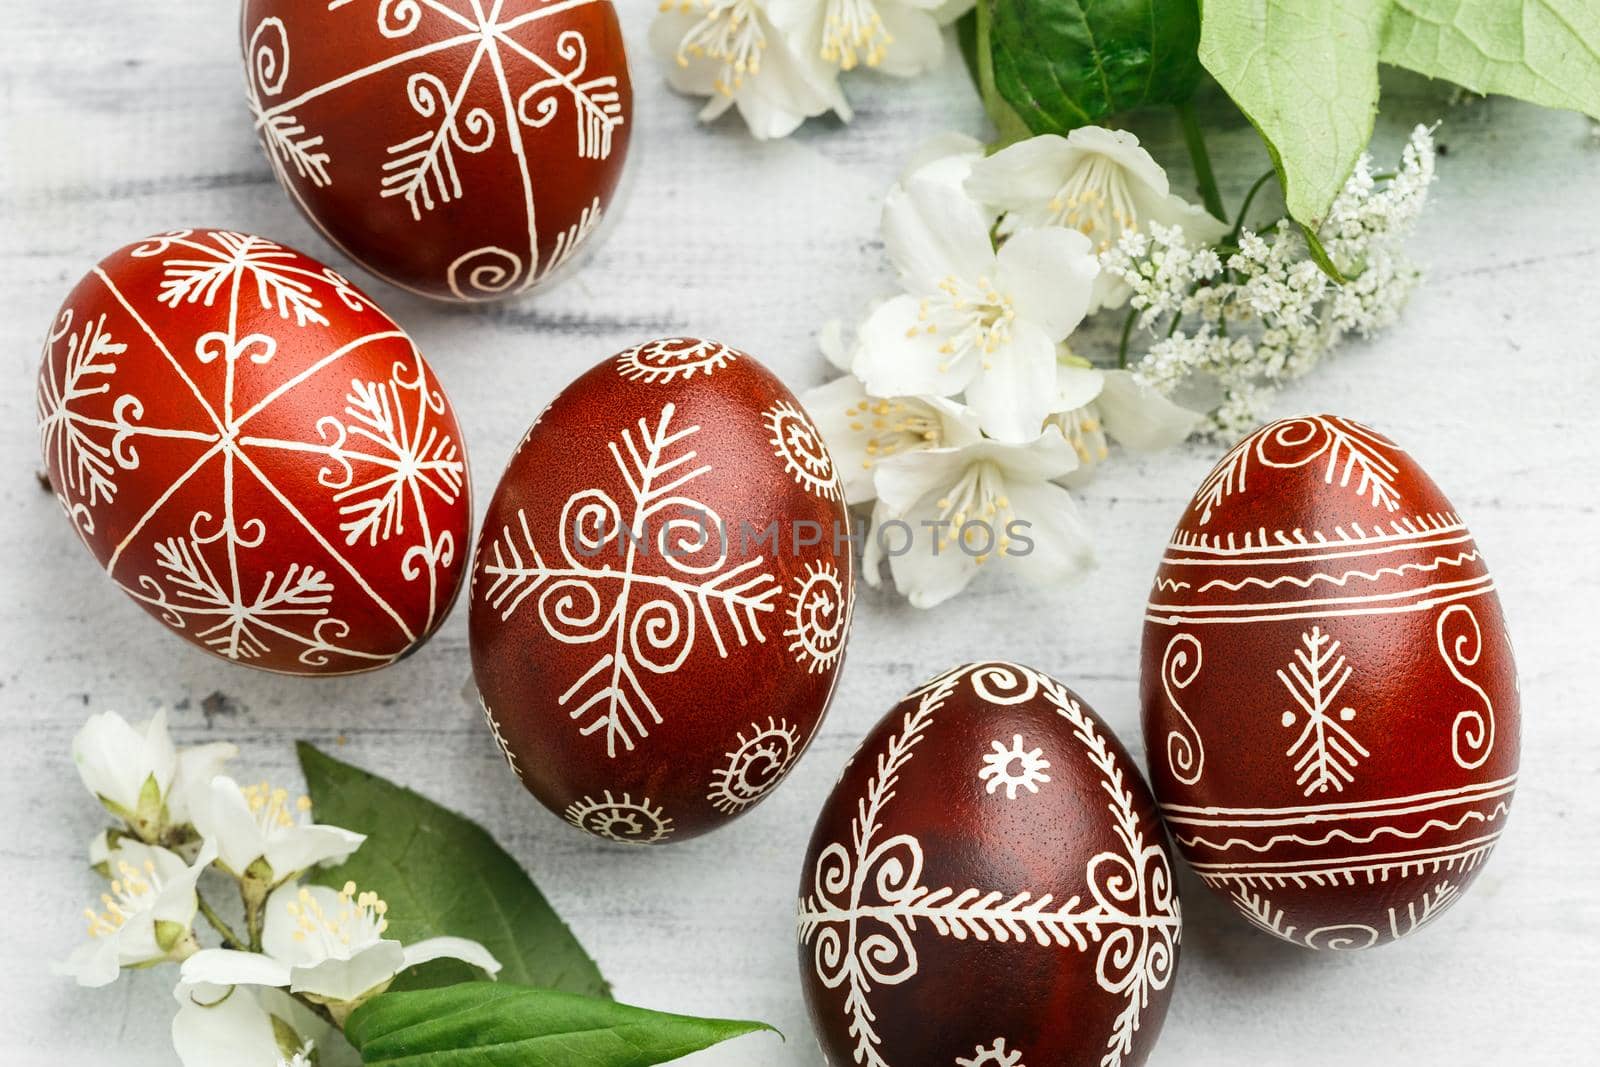 Red and black handmade Easter Pysanka eggs. Ukrainian pysanky decorated with wax-resist dyeing technique. White wooden background